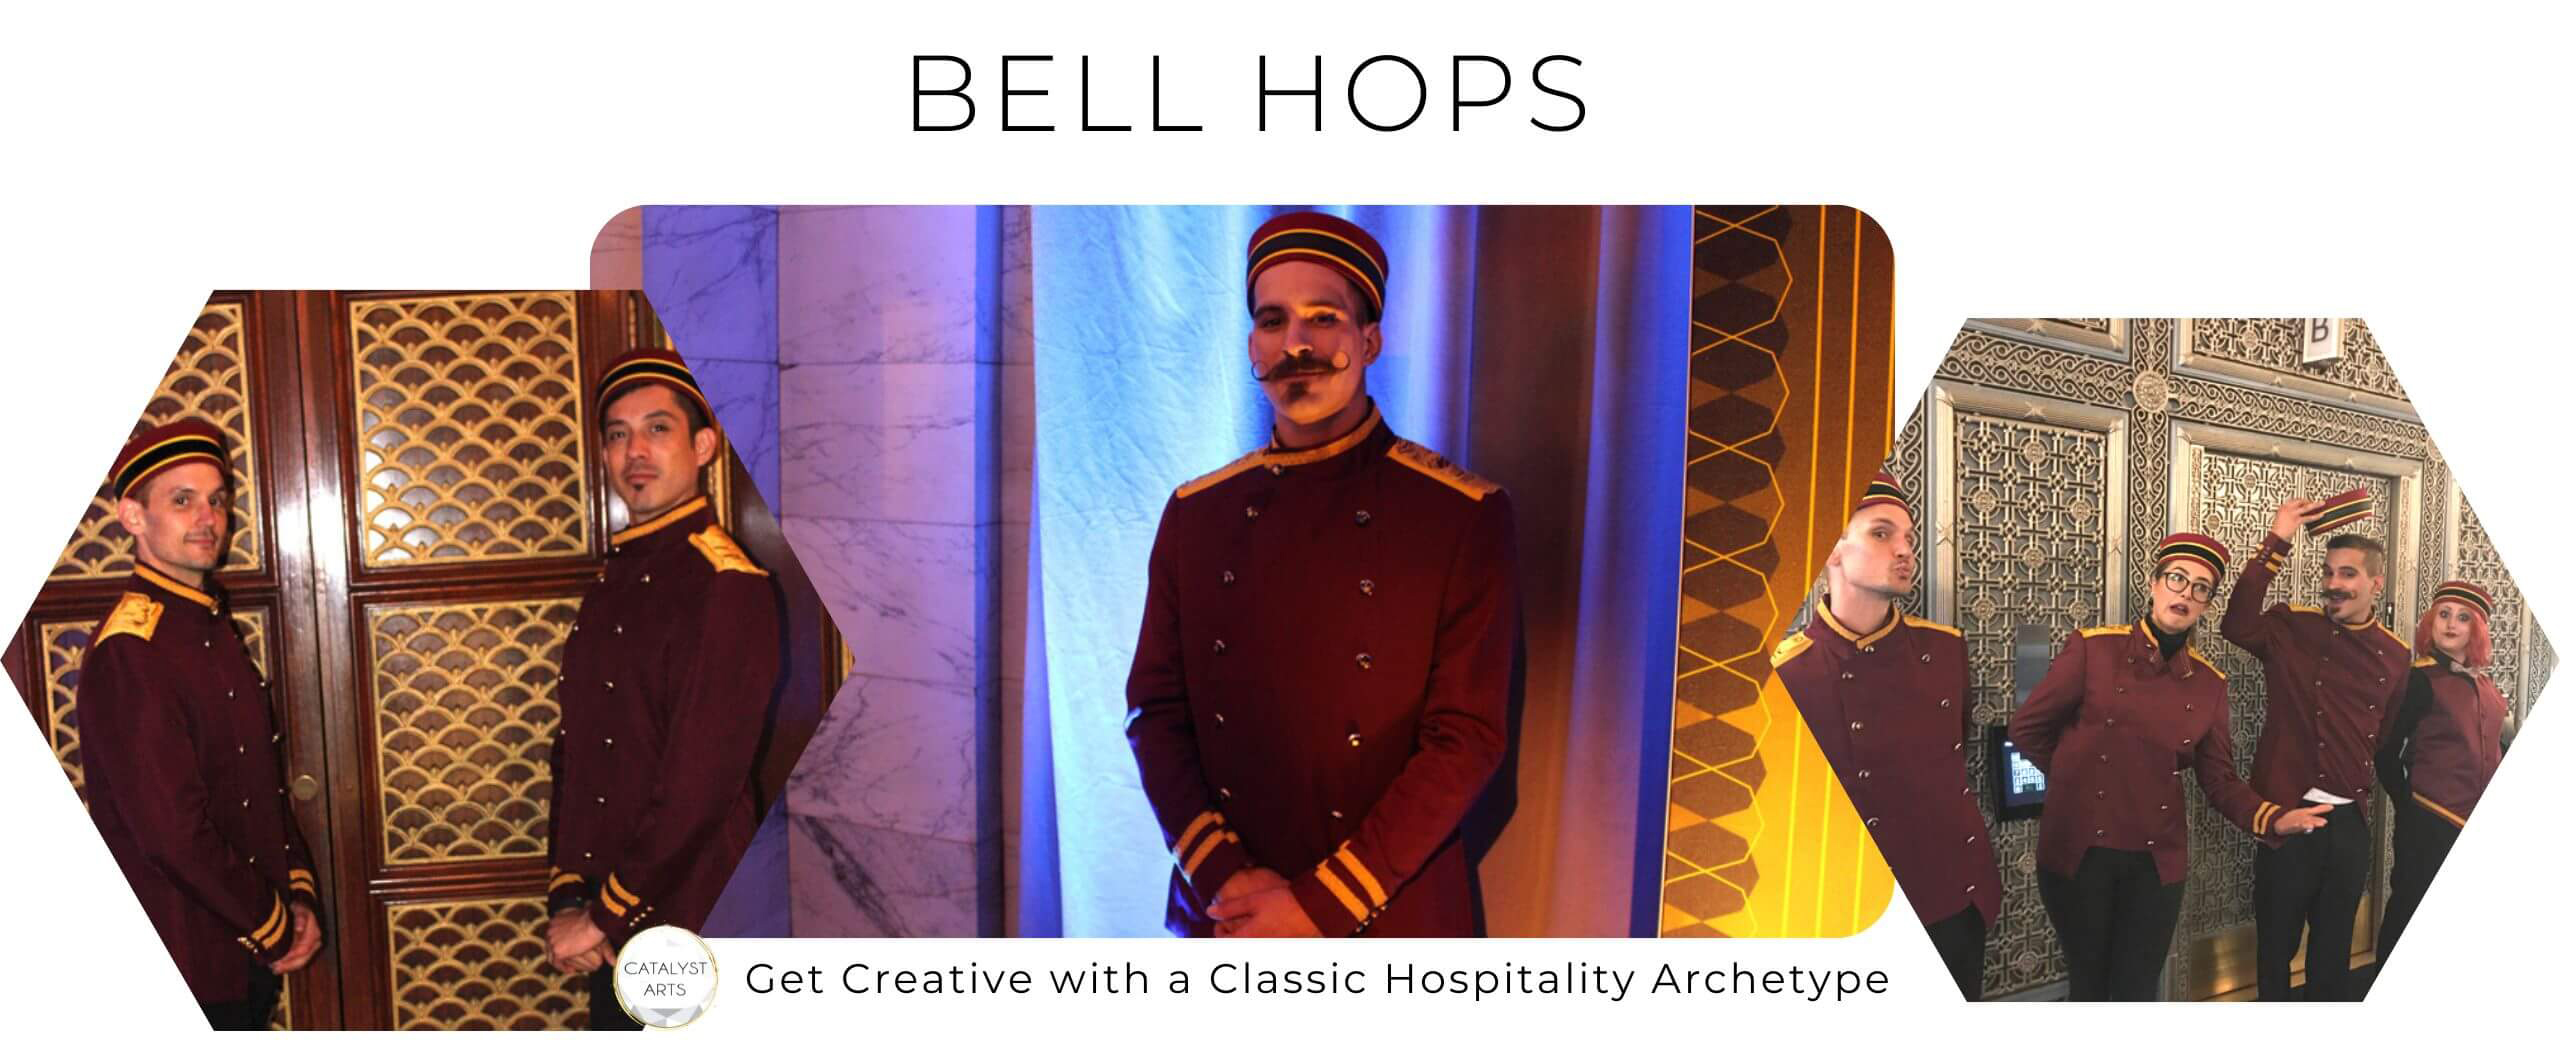 Bellhop costumed character Actors by Catalyst Arts Entertainment company in San Francisco Bay Area